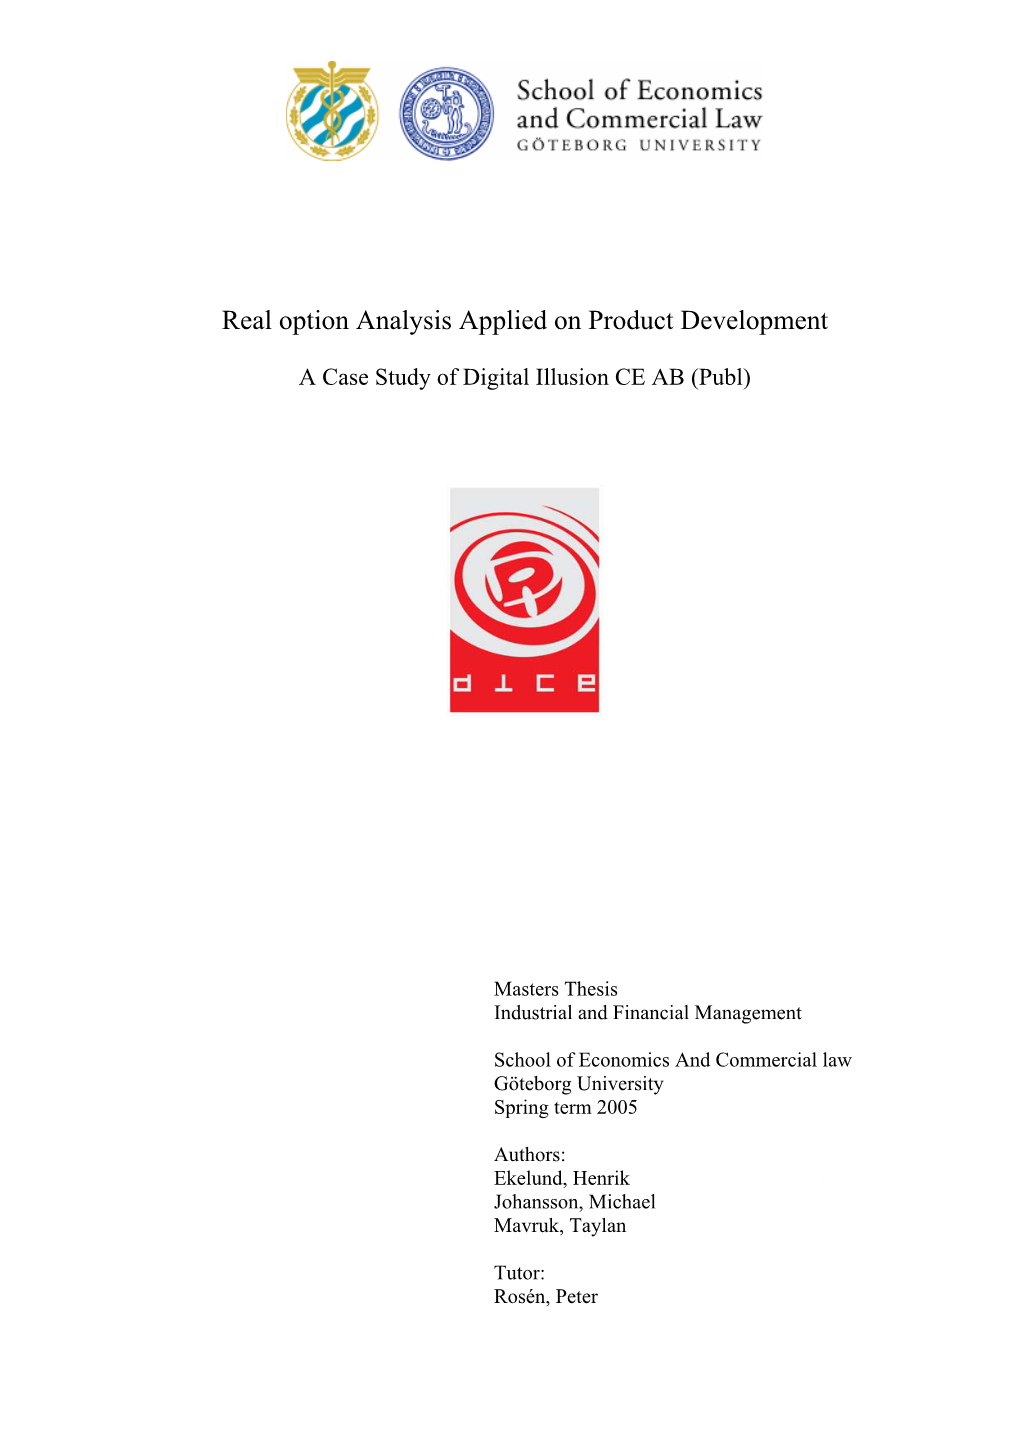 Real Option Analysis Applied on Product Development